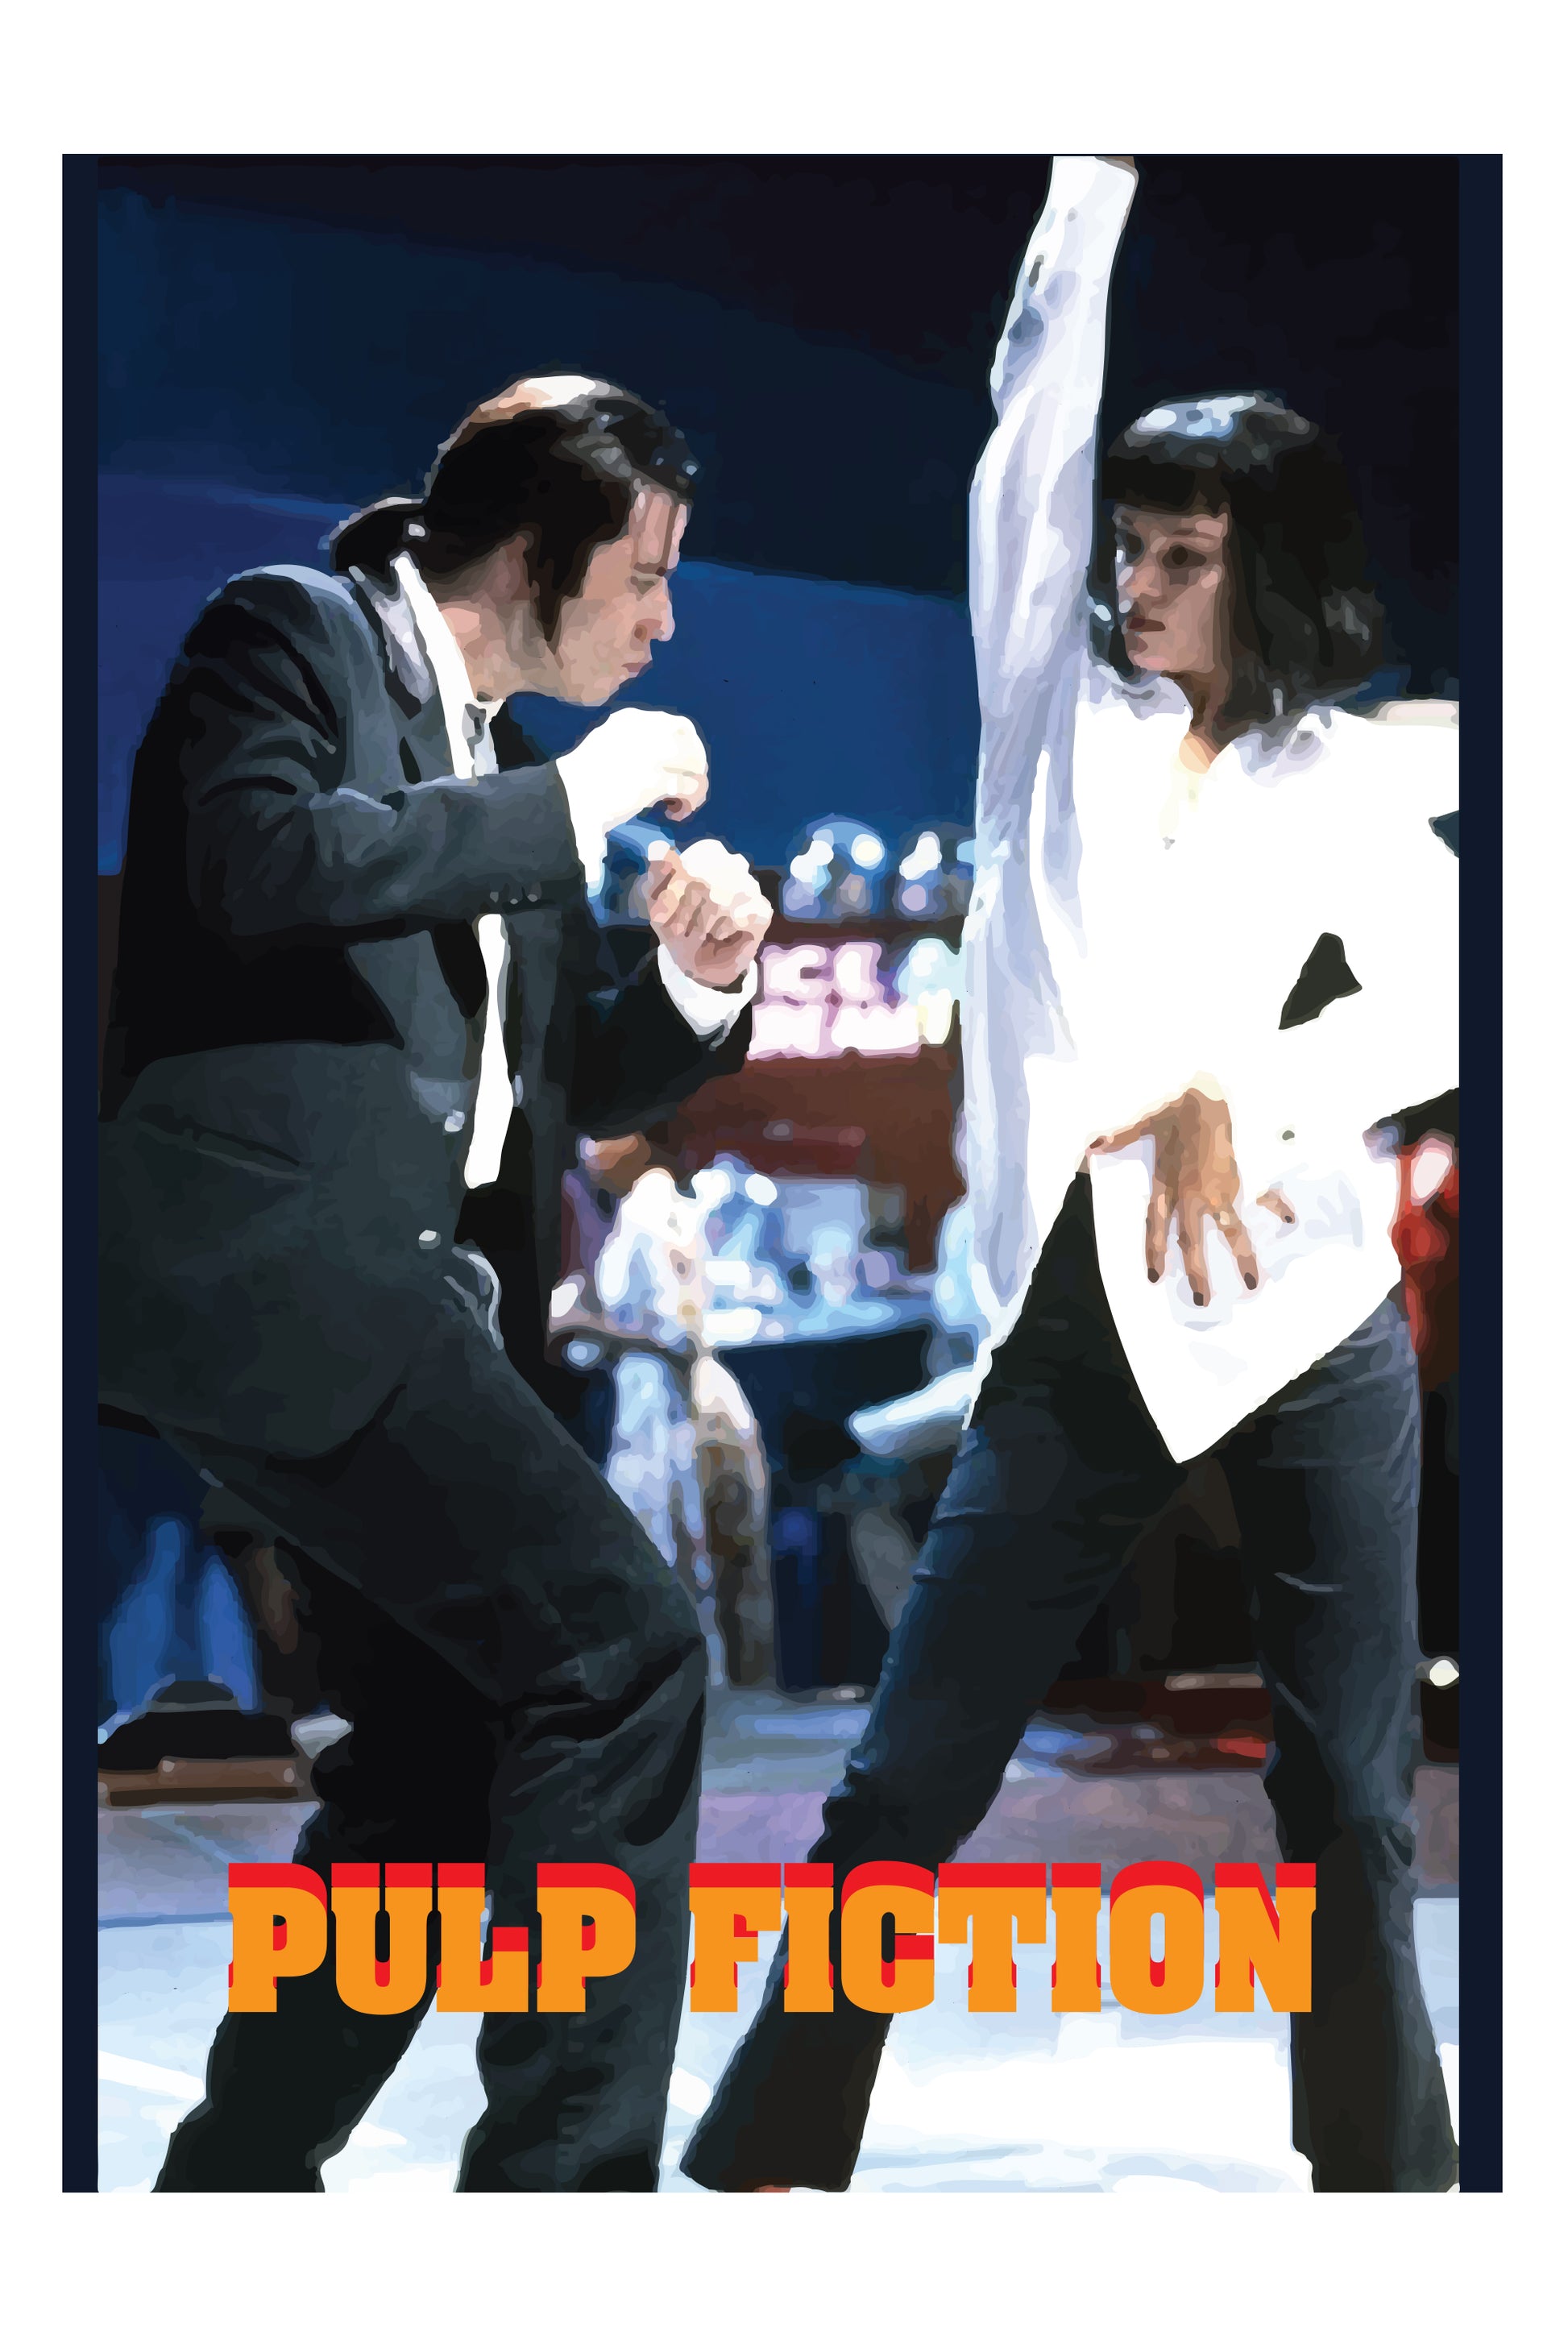 Pulp Fiction Poster – MADD